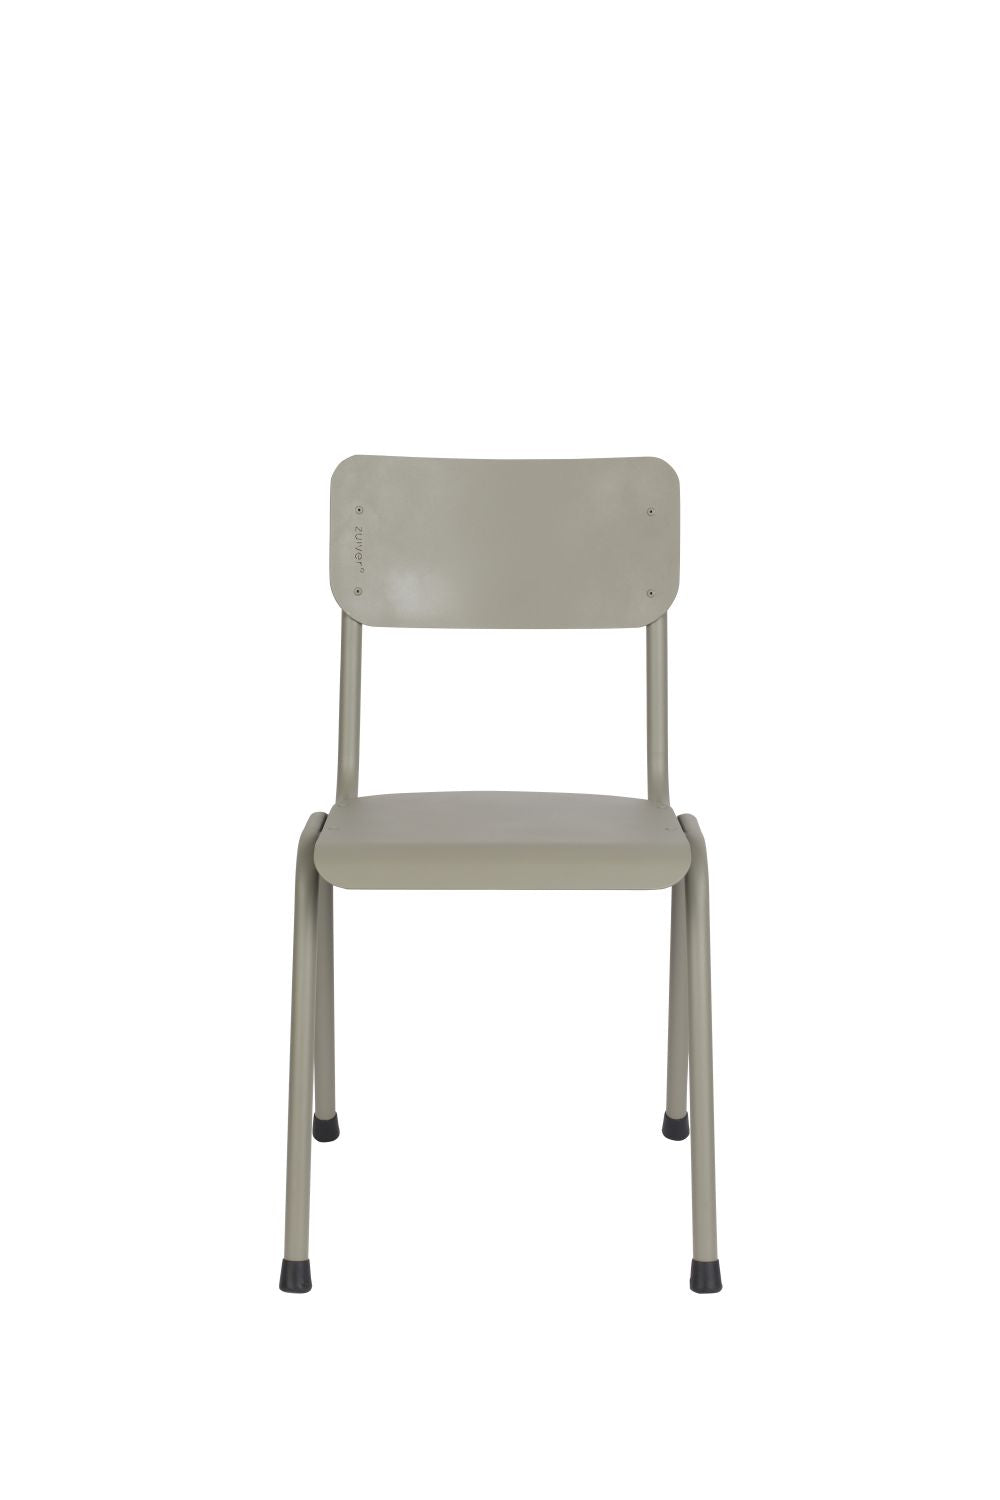  Zuiver-Zuiver Set of 2 Outdoor Chairs Back To School Moss Grey-Grey 17 